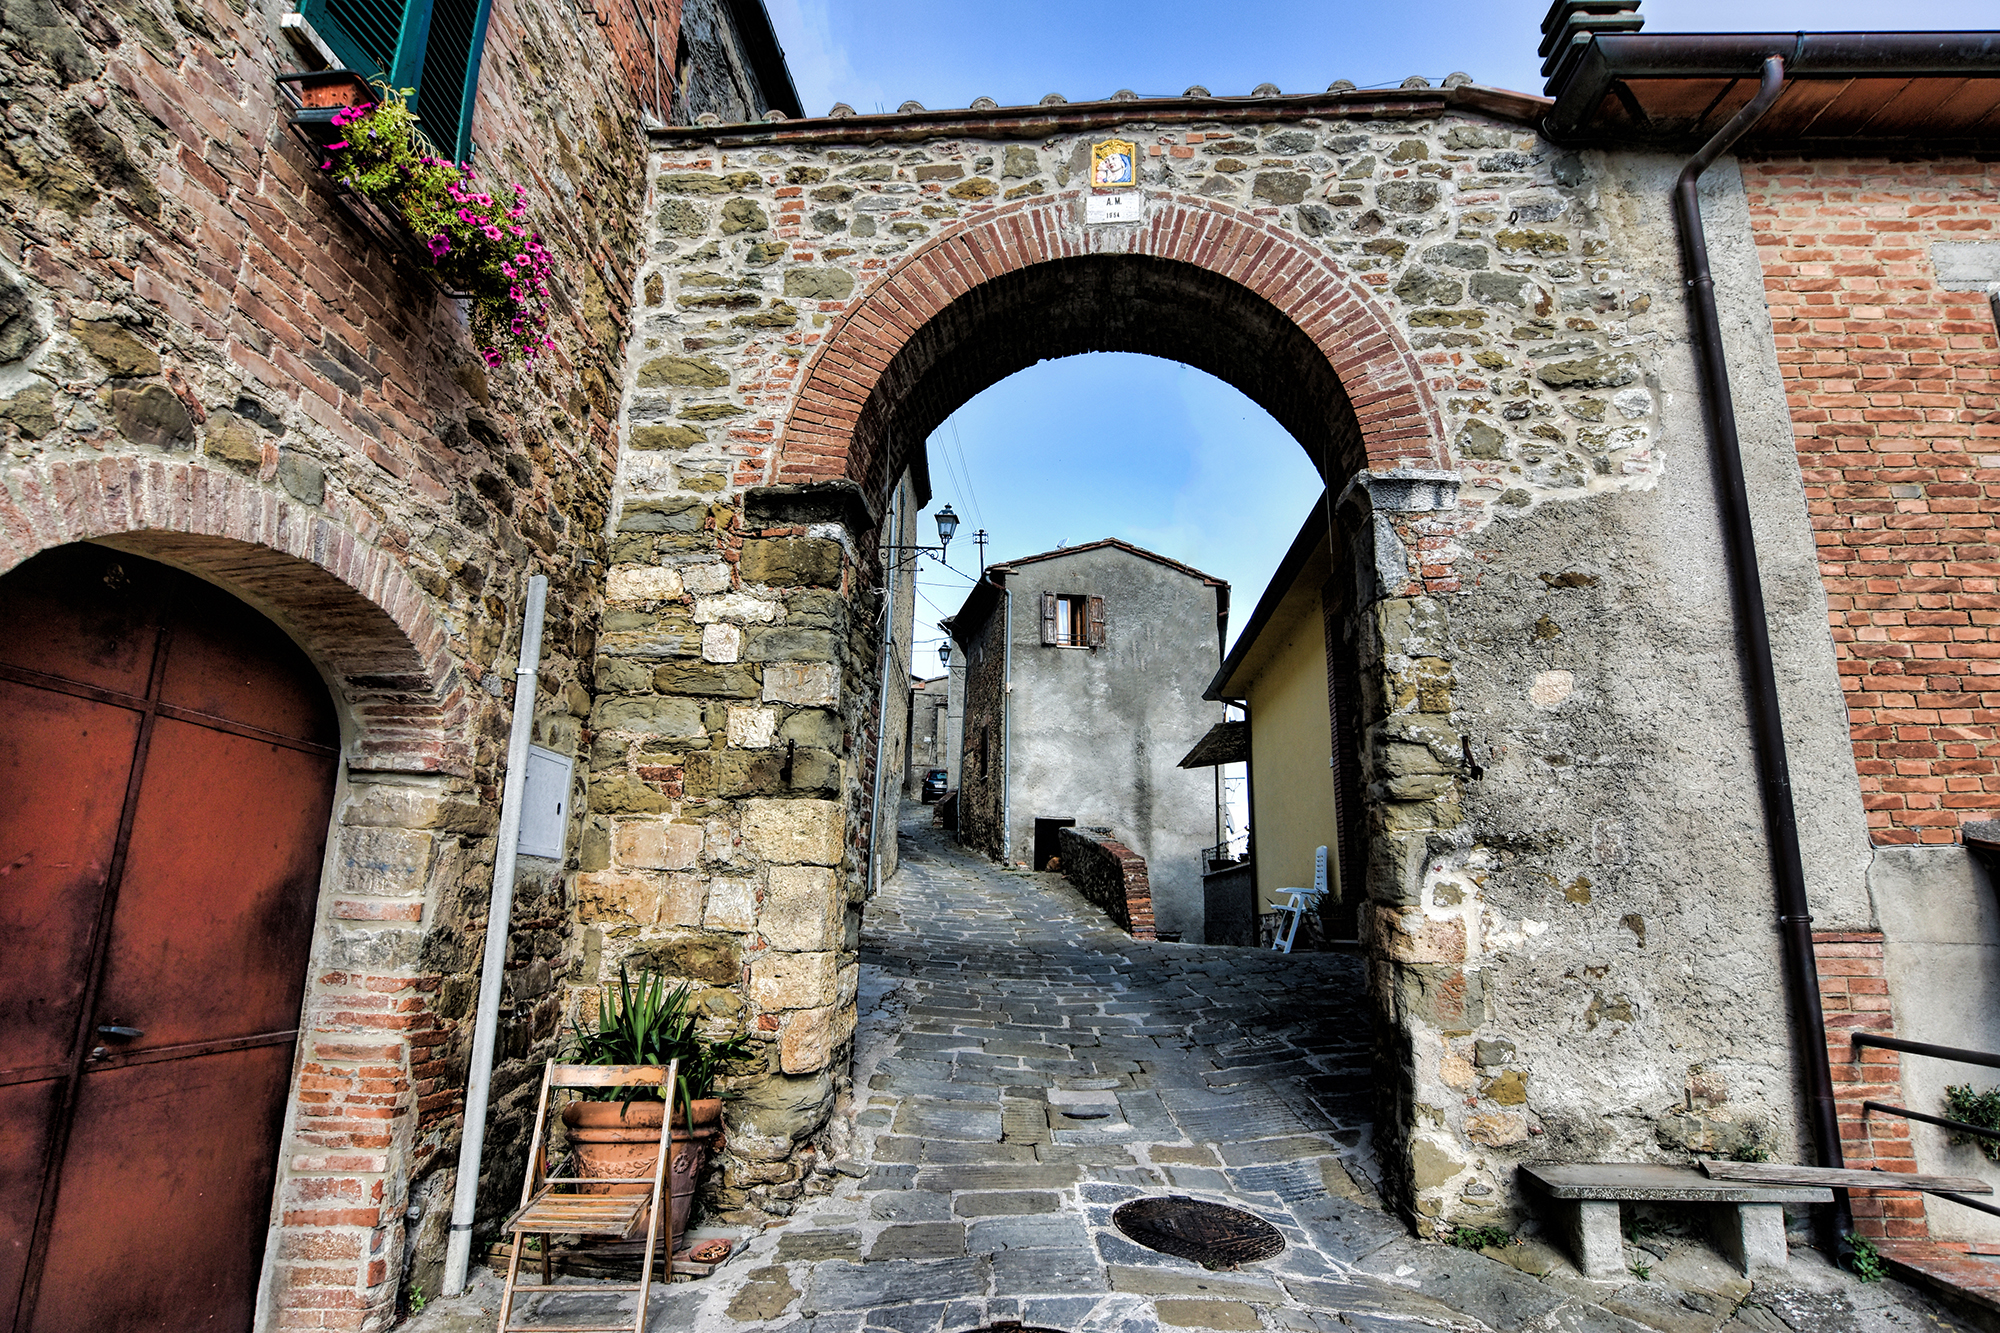 The streets of Scrofiano